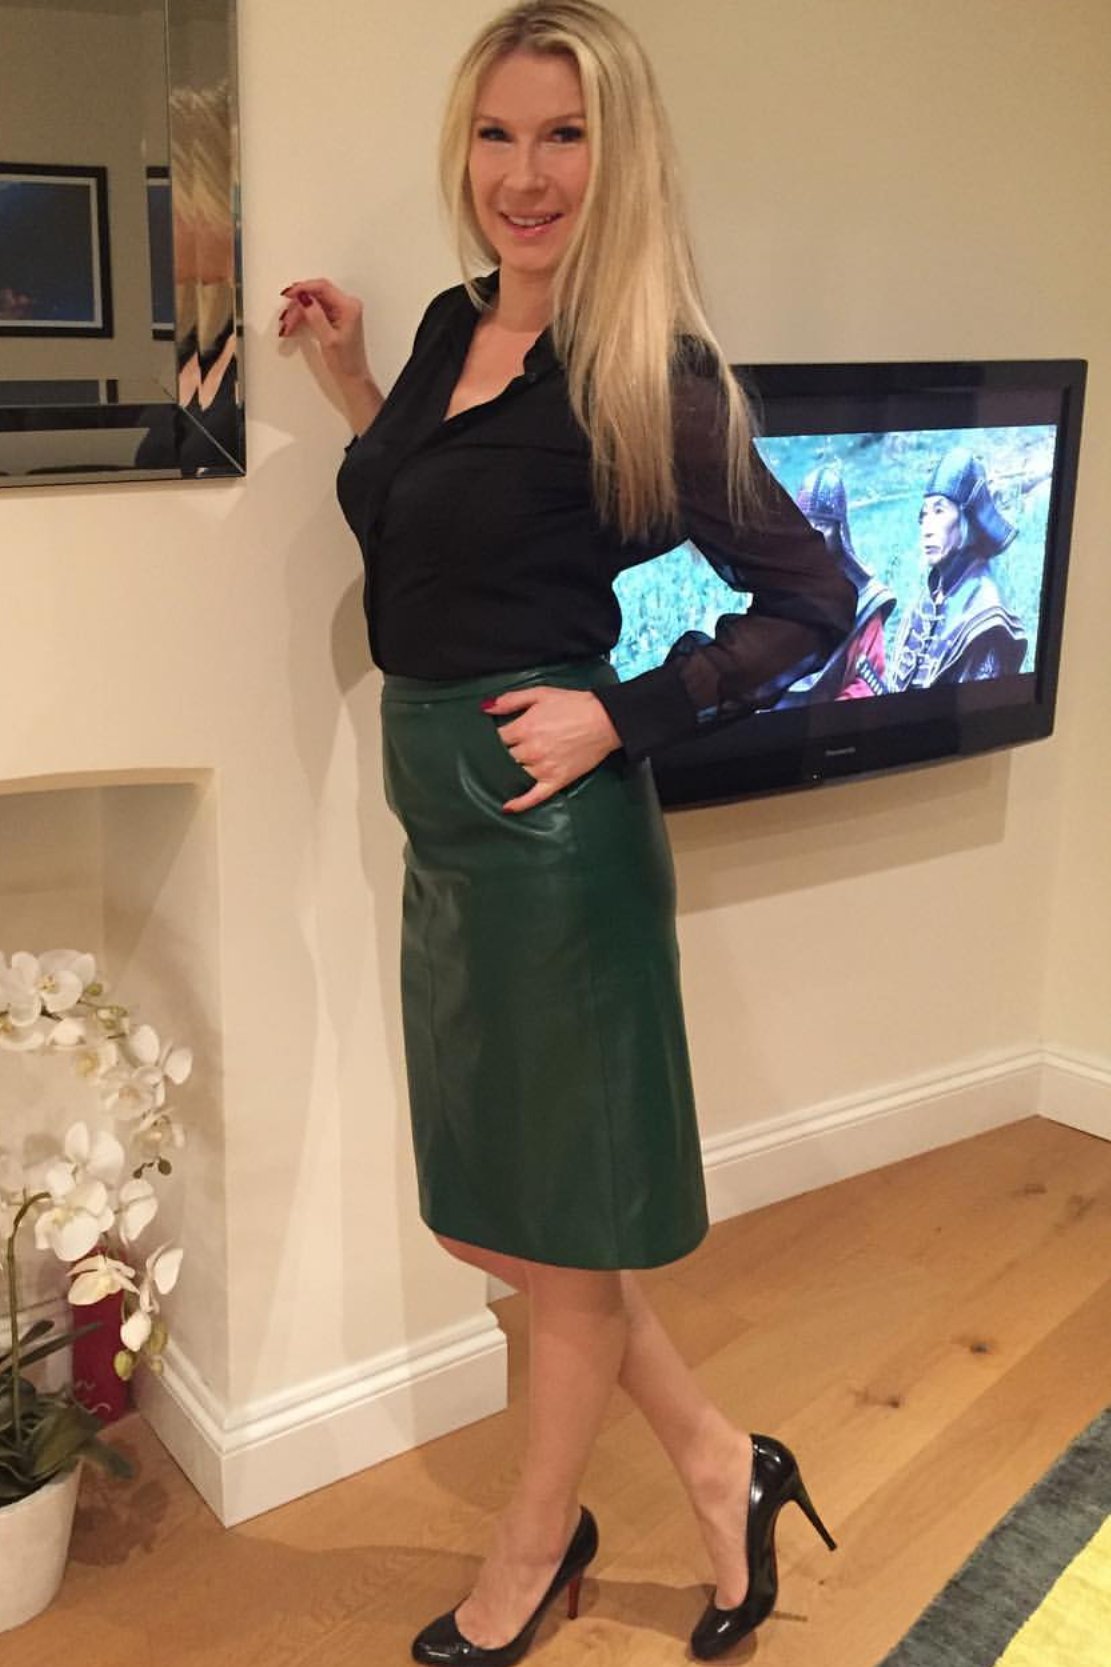 Ladies in Leather on Twitter: "#LeatherSkirt #GreenLeather #LoveLeather